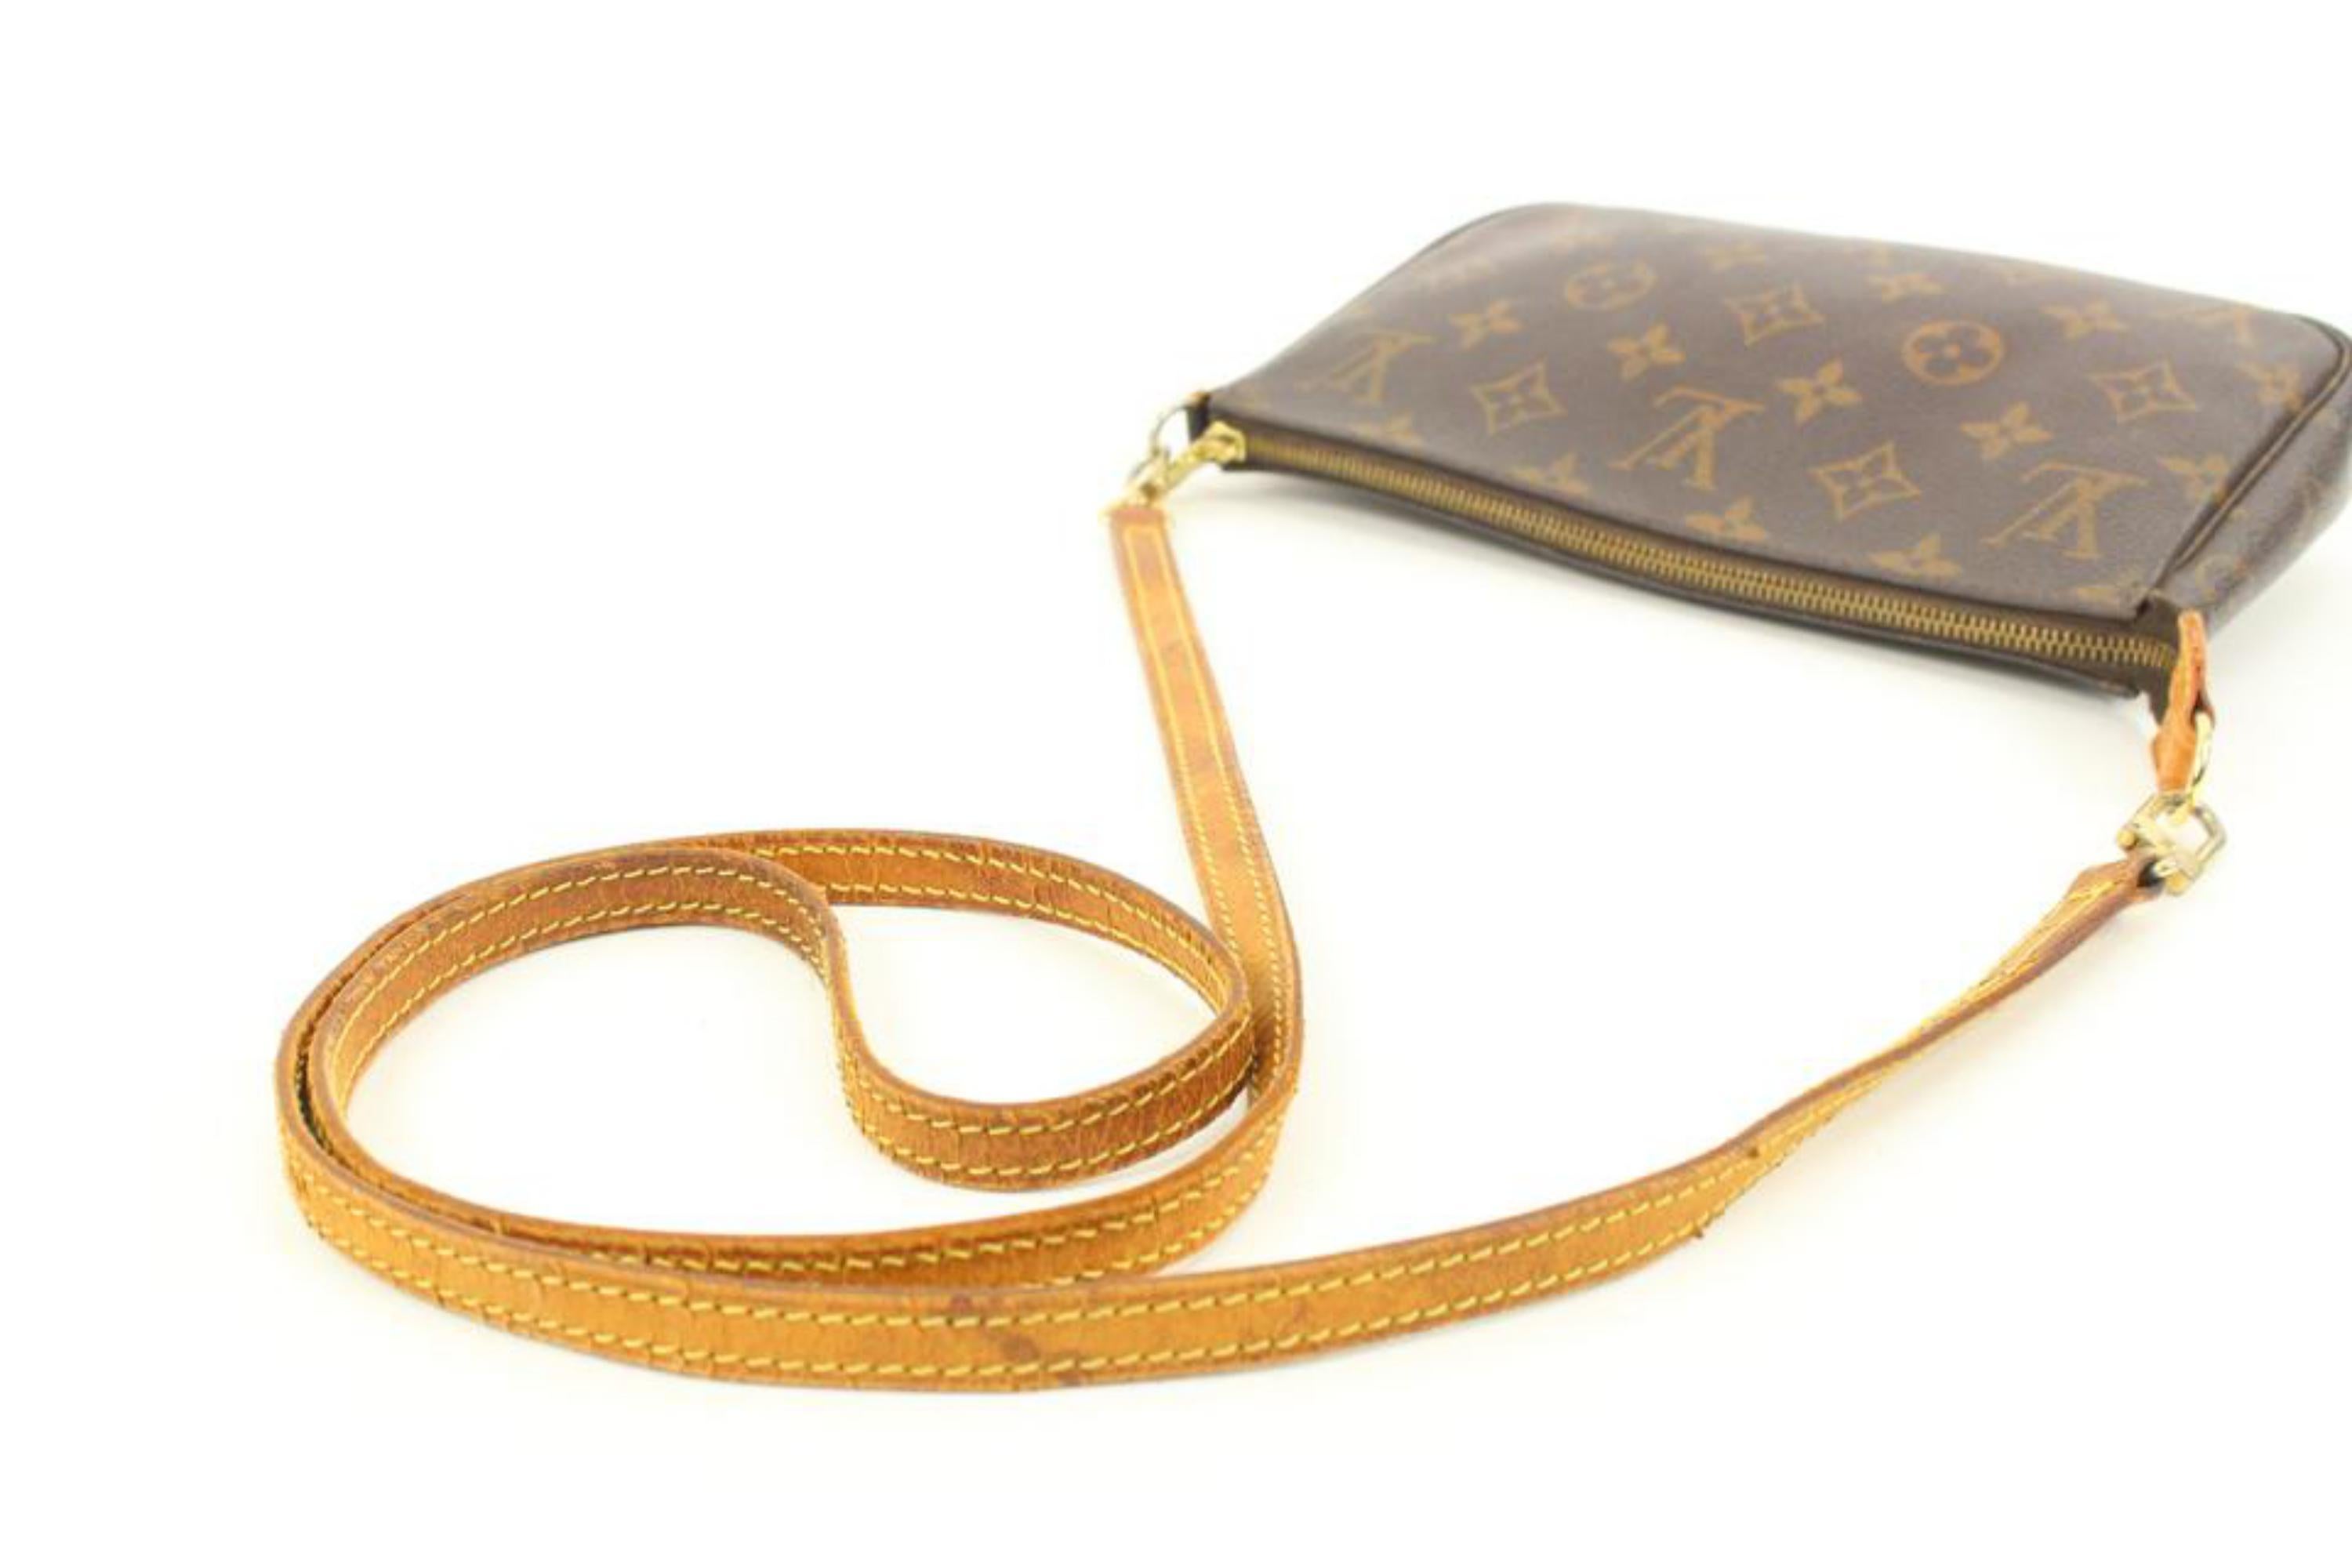 Louis Vuitton Monogram Pochette Accessoires with Long Strap 121lv57
Date Code/Serial Number: AR1929
Made In: France
Measurements: Length:  8